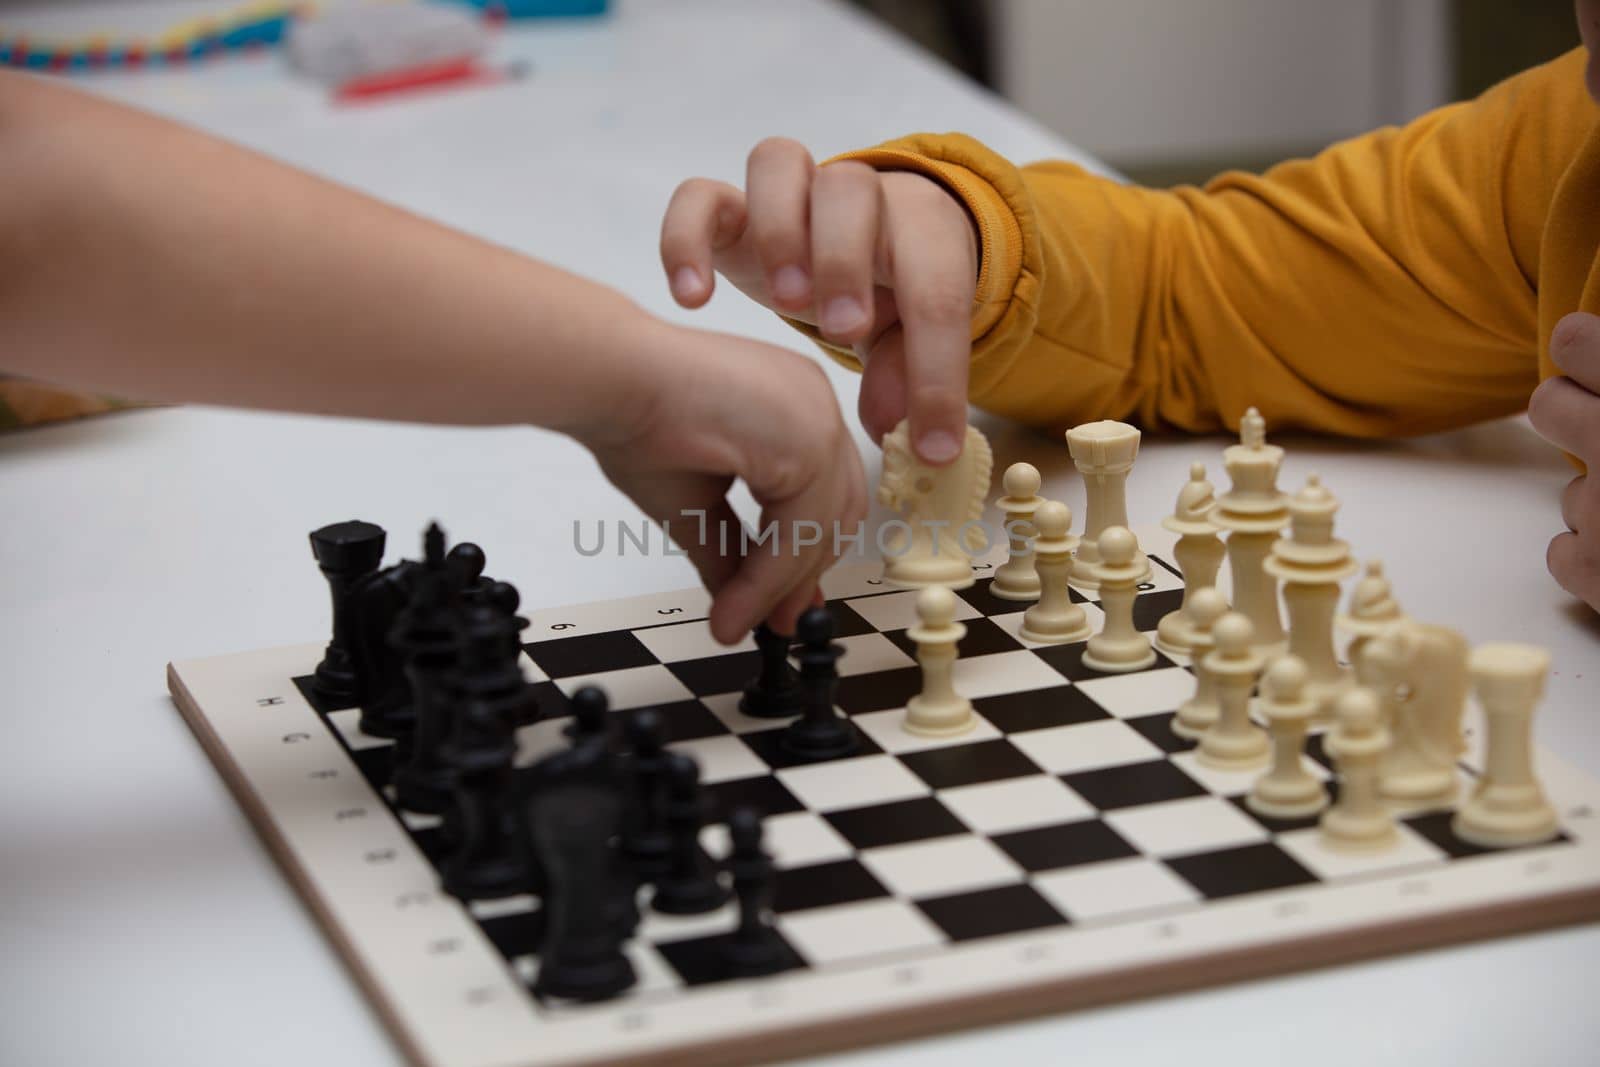 sits at a table and plays chess. The kid concentrated on the game and thinks where to make his next move. Early development, home educational games for children by senkaya